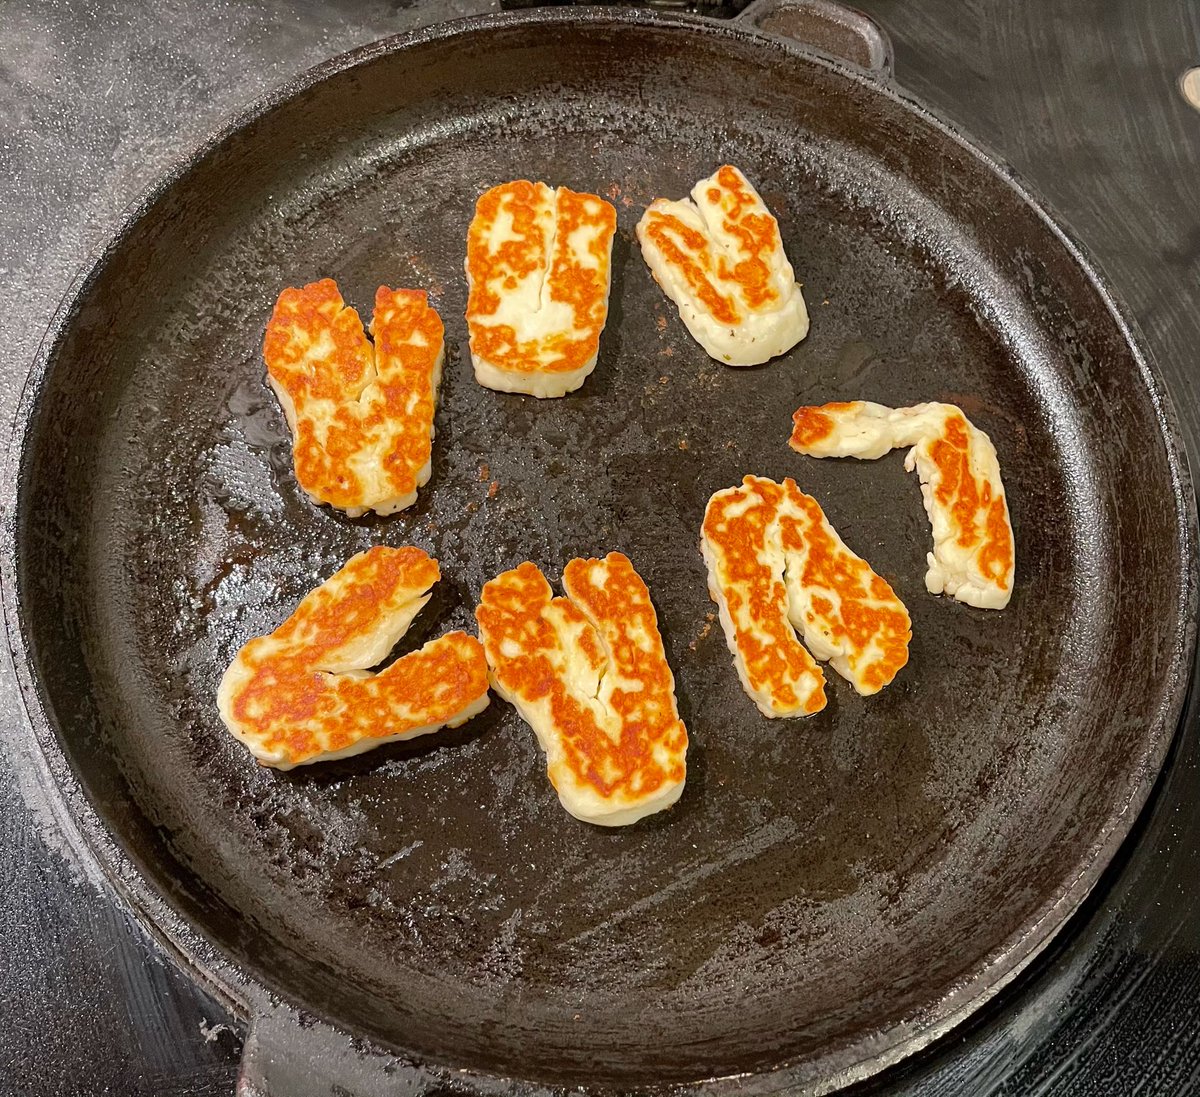 Cooking halloumi last night. Sometimes you feel the universe is telling you something.